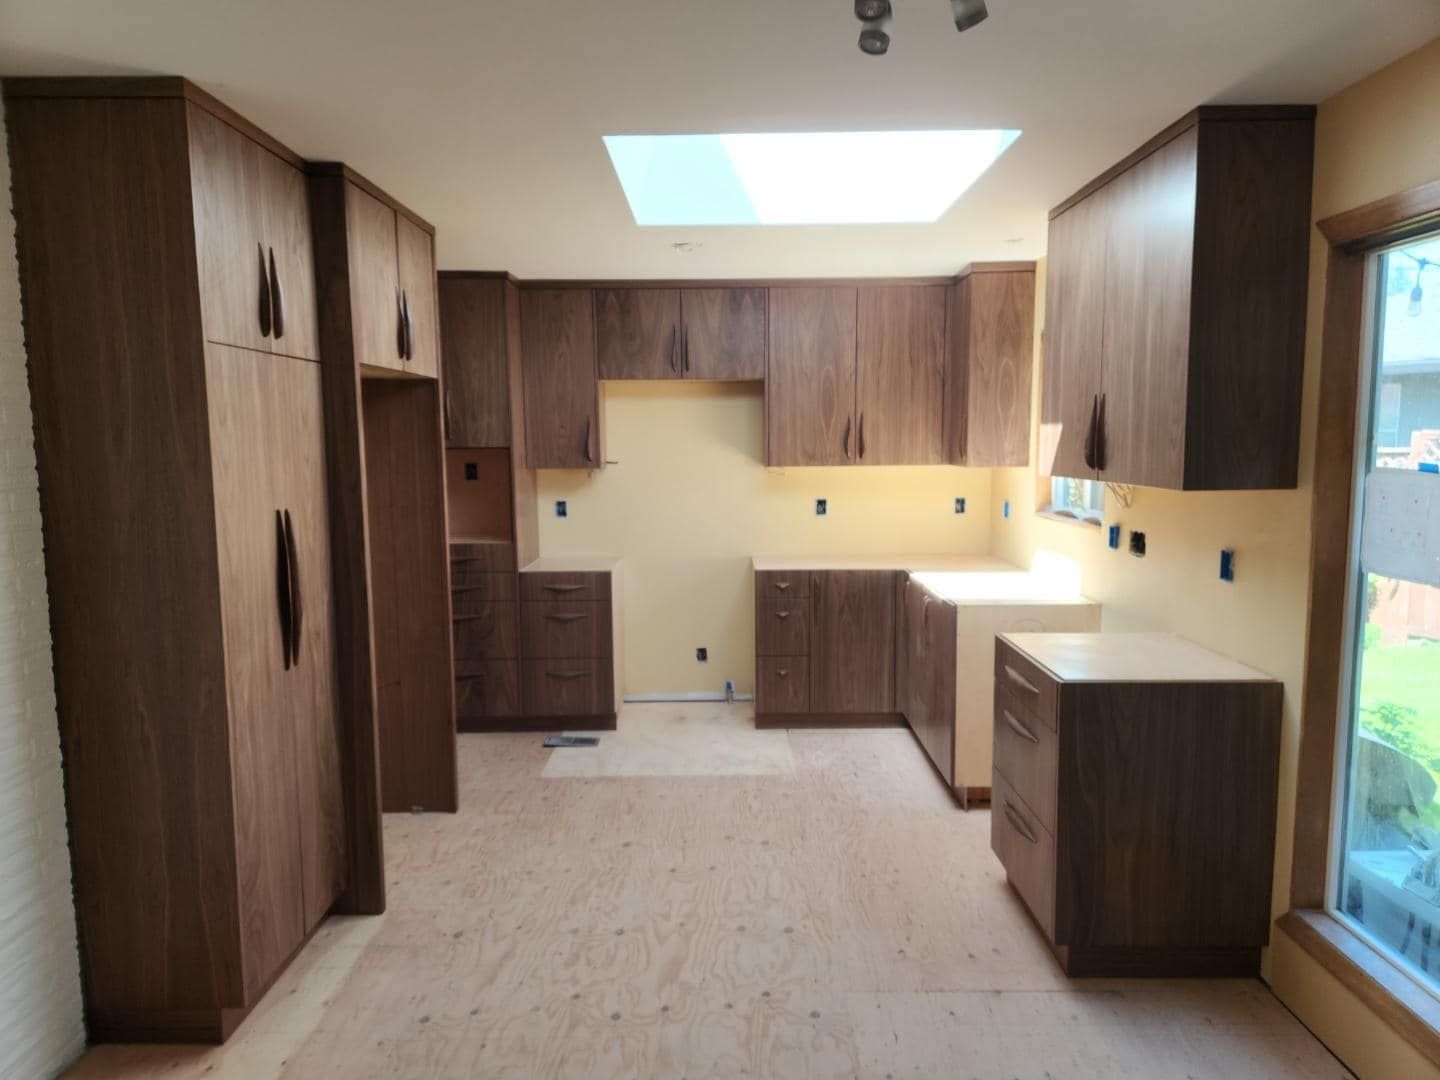 A kitchen with wooden cabinets and a skylight